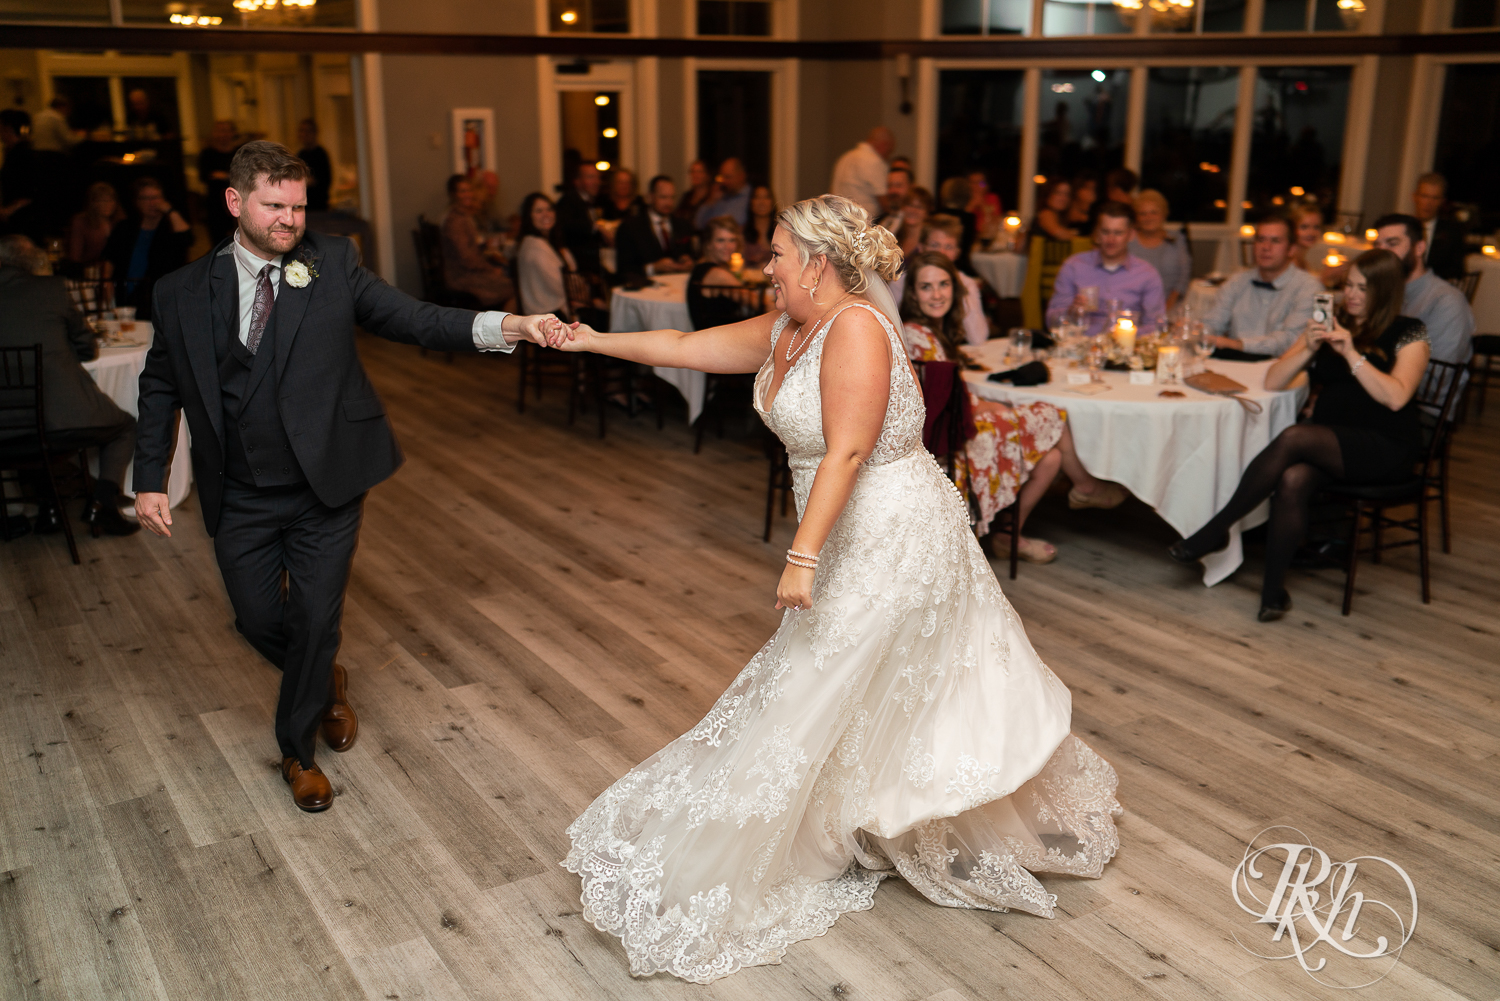 Bride and groom share first dance during wedding reception at Hastings Golf Club in Hastings, Minnesota.